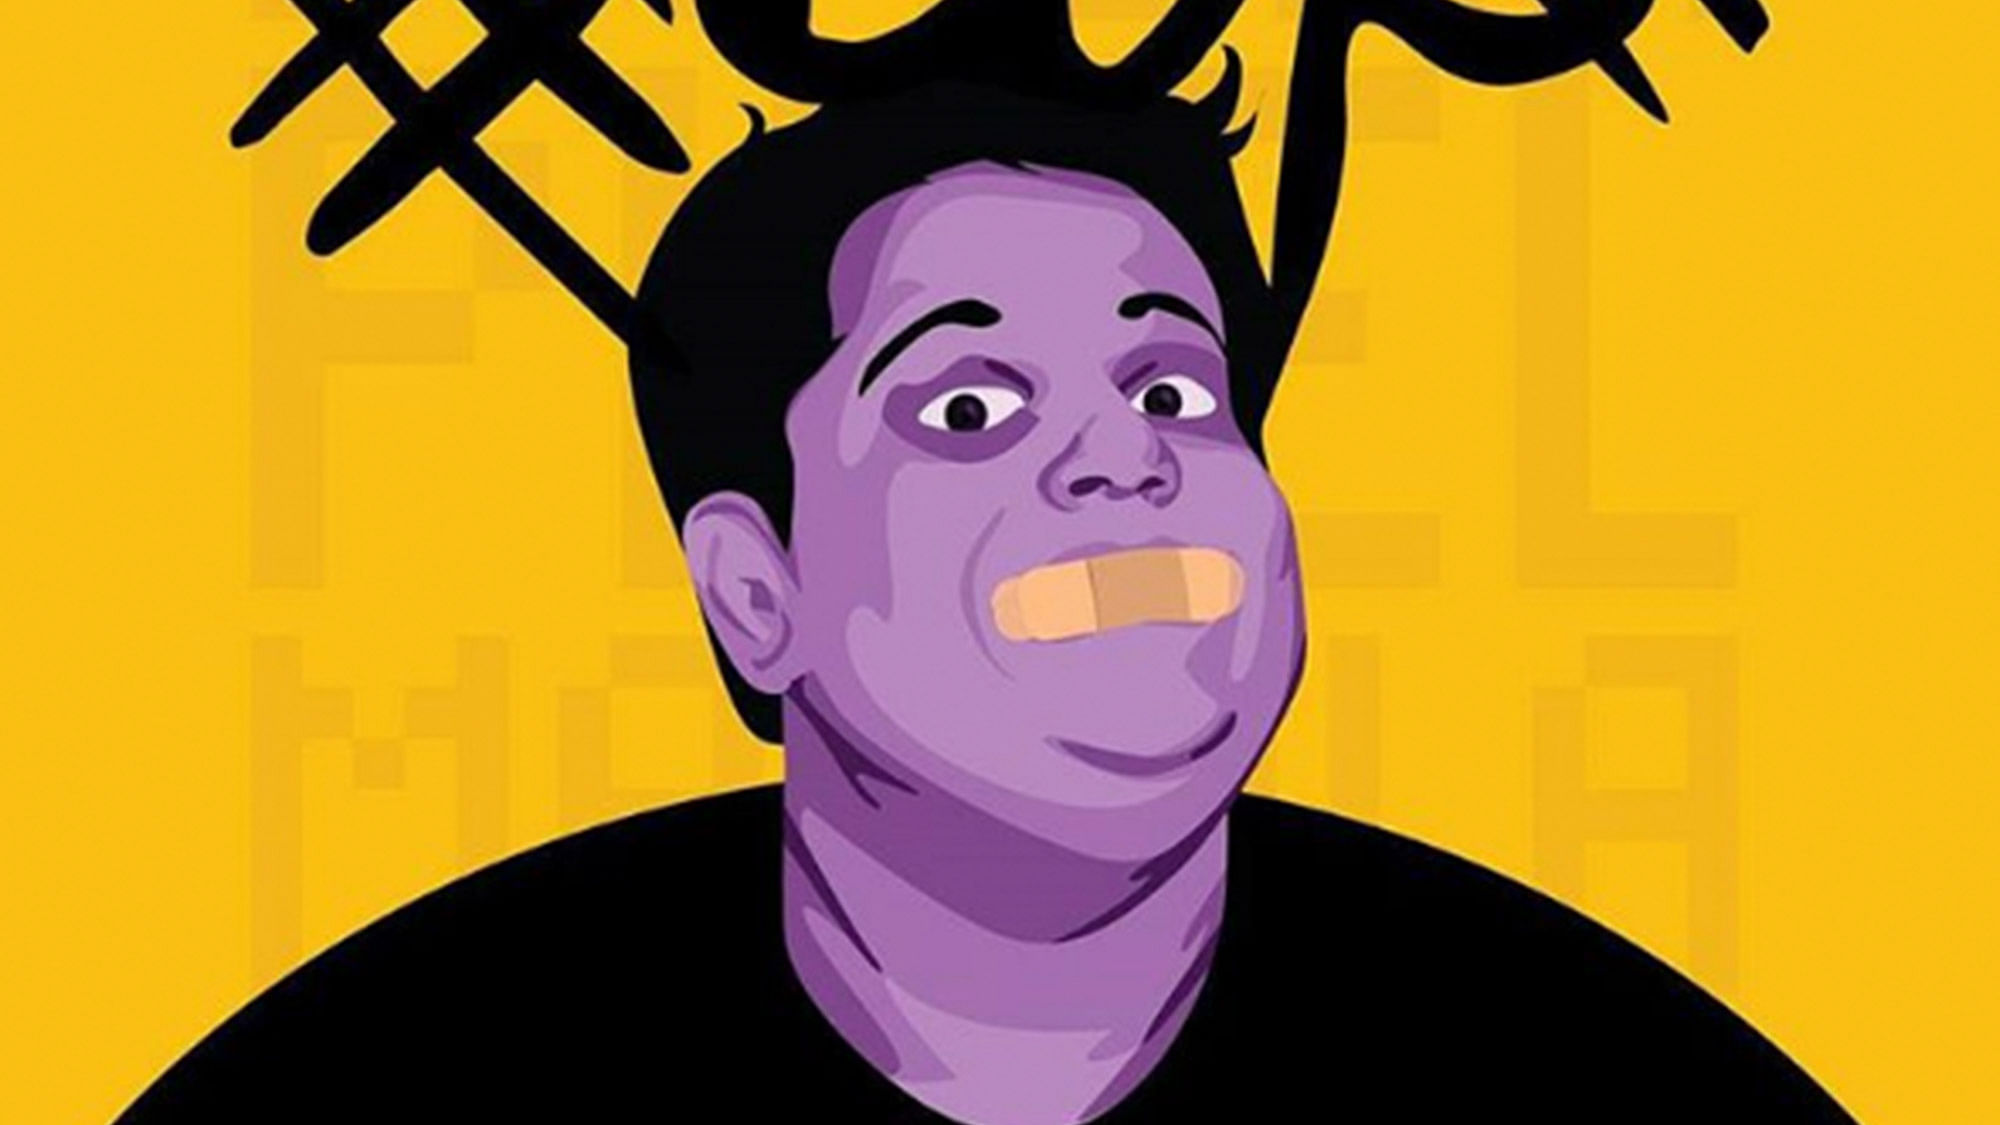 Tanmay Bhat, try to be a little unfunny, will ya? (Photo Courtesy:<a href="https://www.instagram.com/tanmaybhat/?hl=en"> Rachit Tank</a>/<a href="https://www.instagram.com/tanmaybhat/?hl=en">Paneer Pixel Masala</a>)